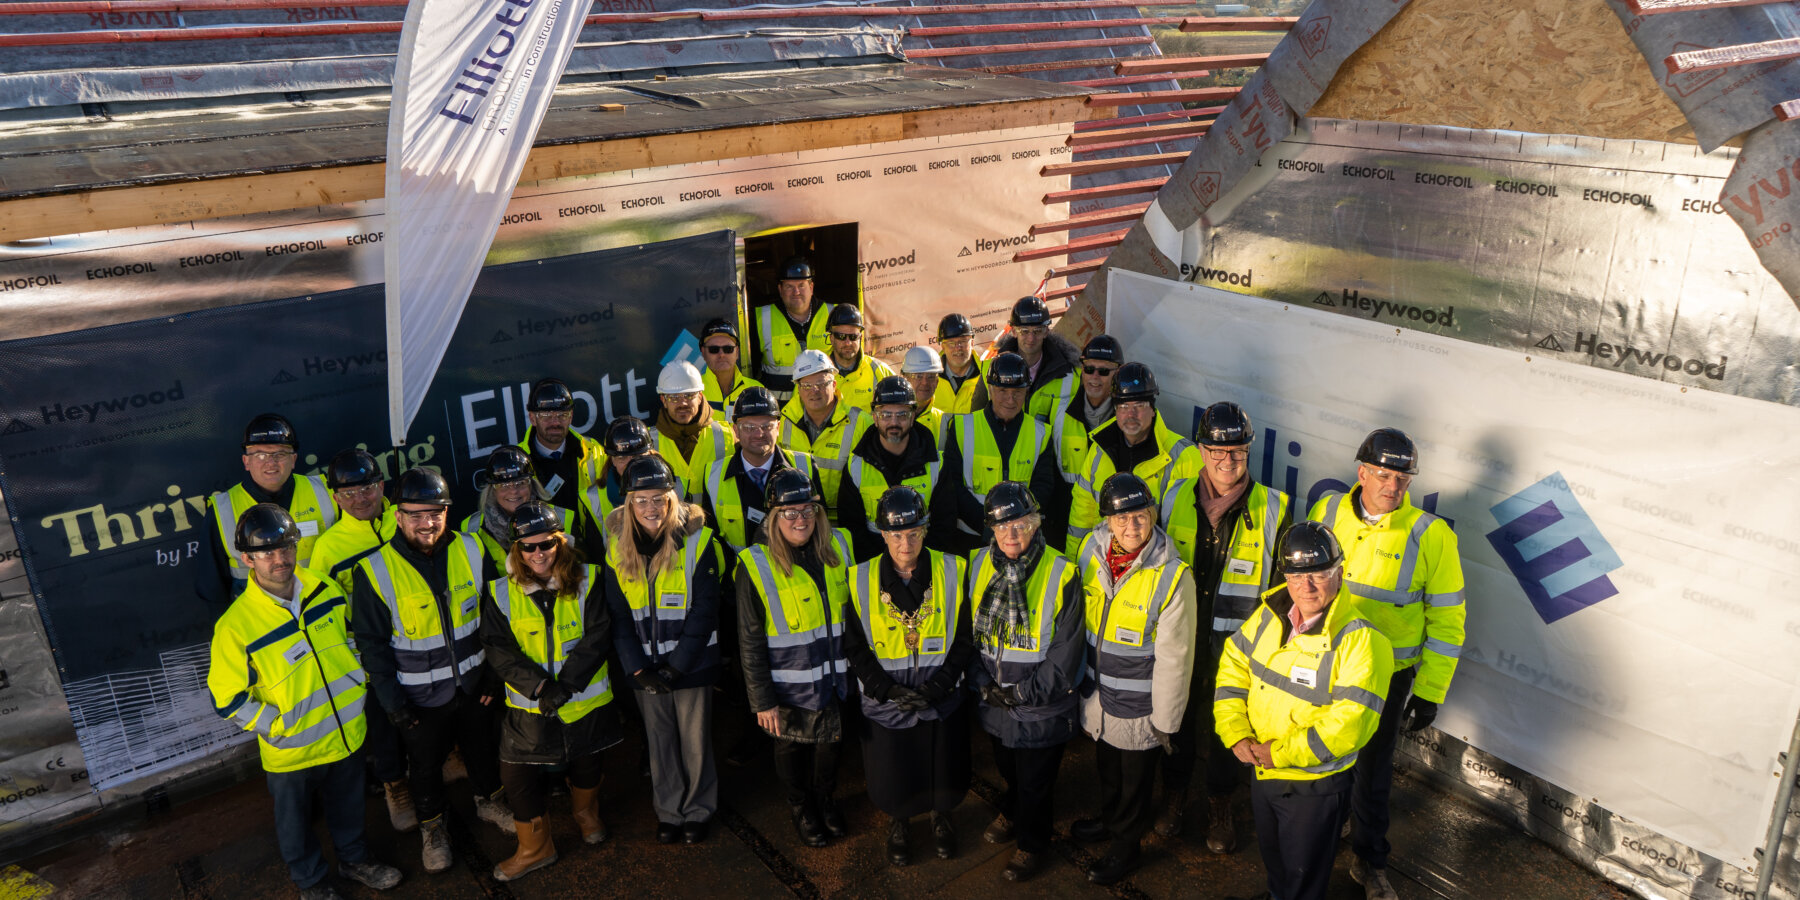 The Wyldewoods, Chester Elliott Group Topping Out